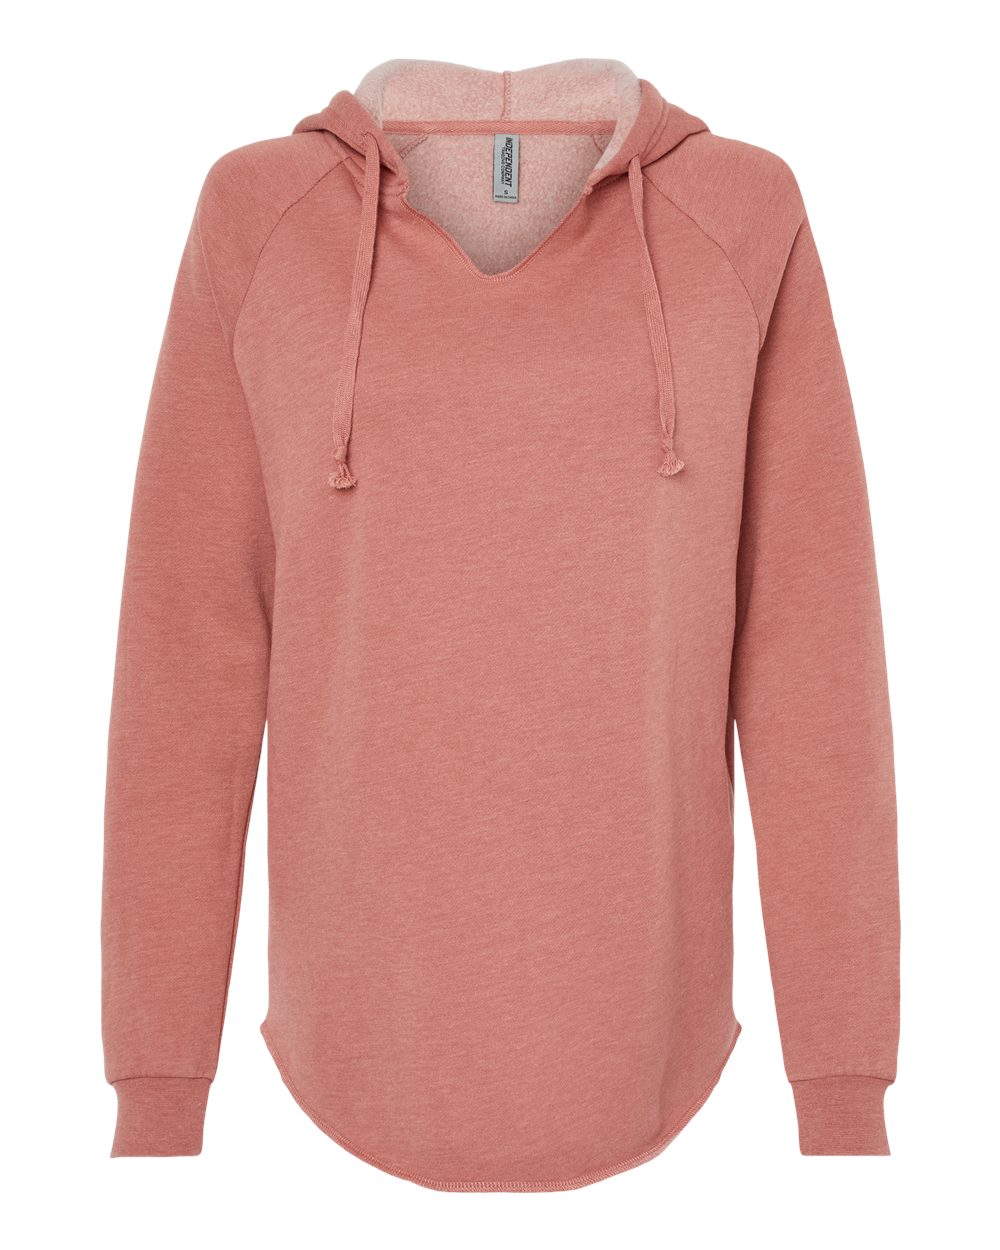 Womens Lightweight California Wave Wash Hooded Sweatshirt-Independent Trading Co.